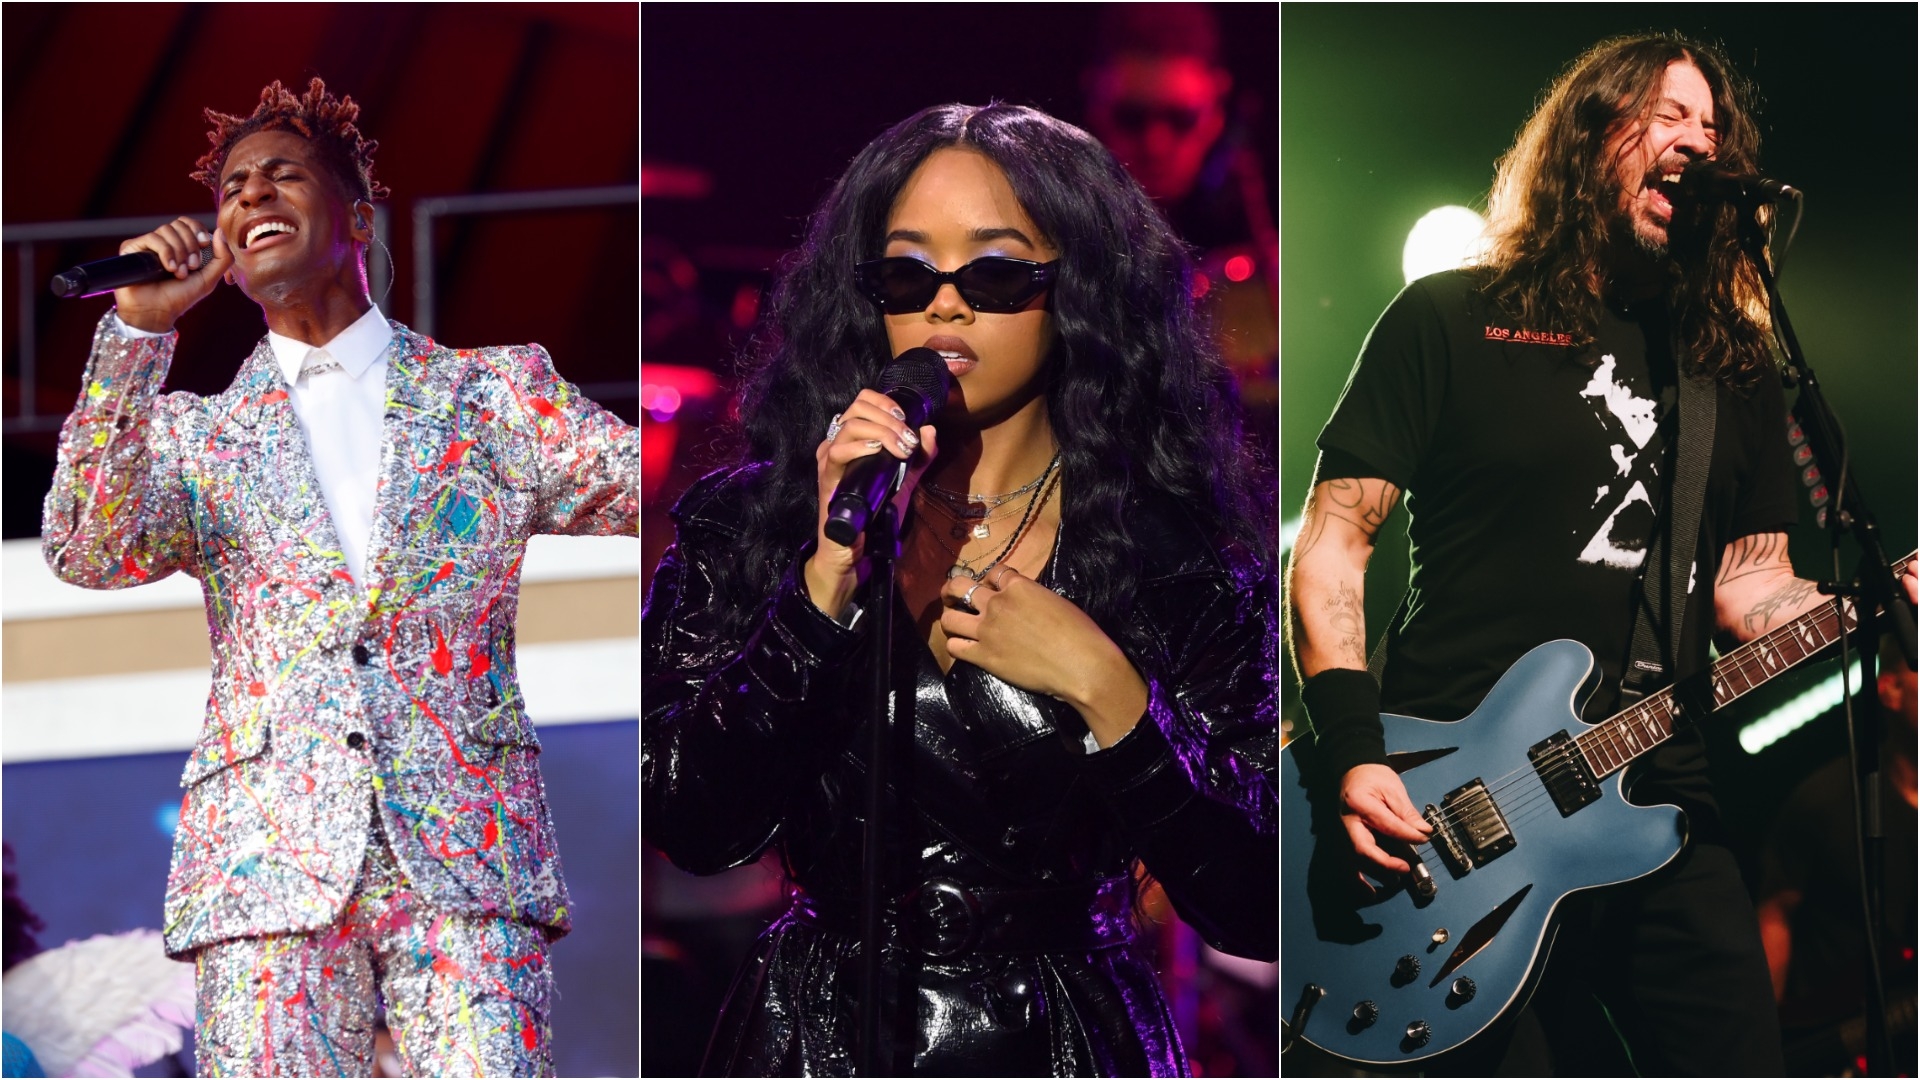 UPDATE: Jon Batiste, Foo Fighters, H.E.R. added to list of performers for the 2022 Grammys